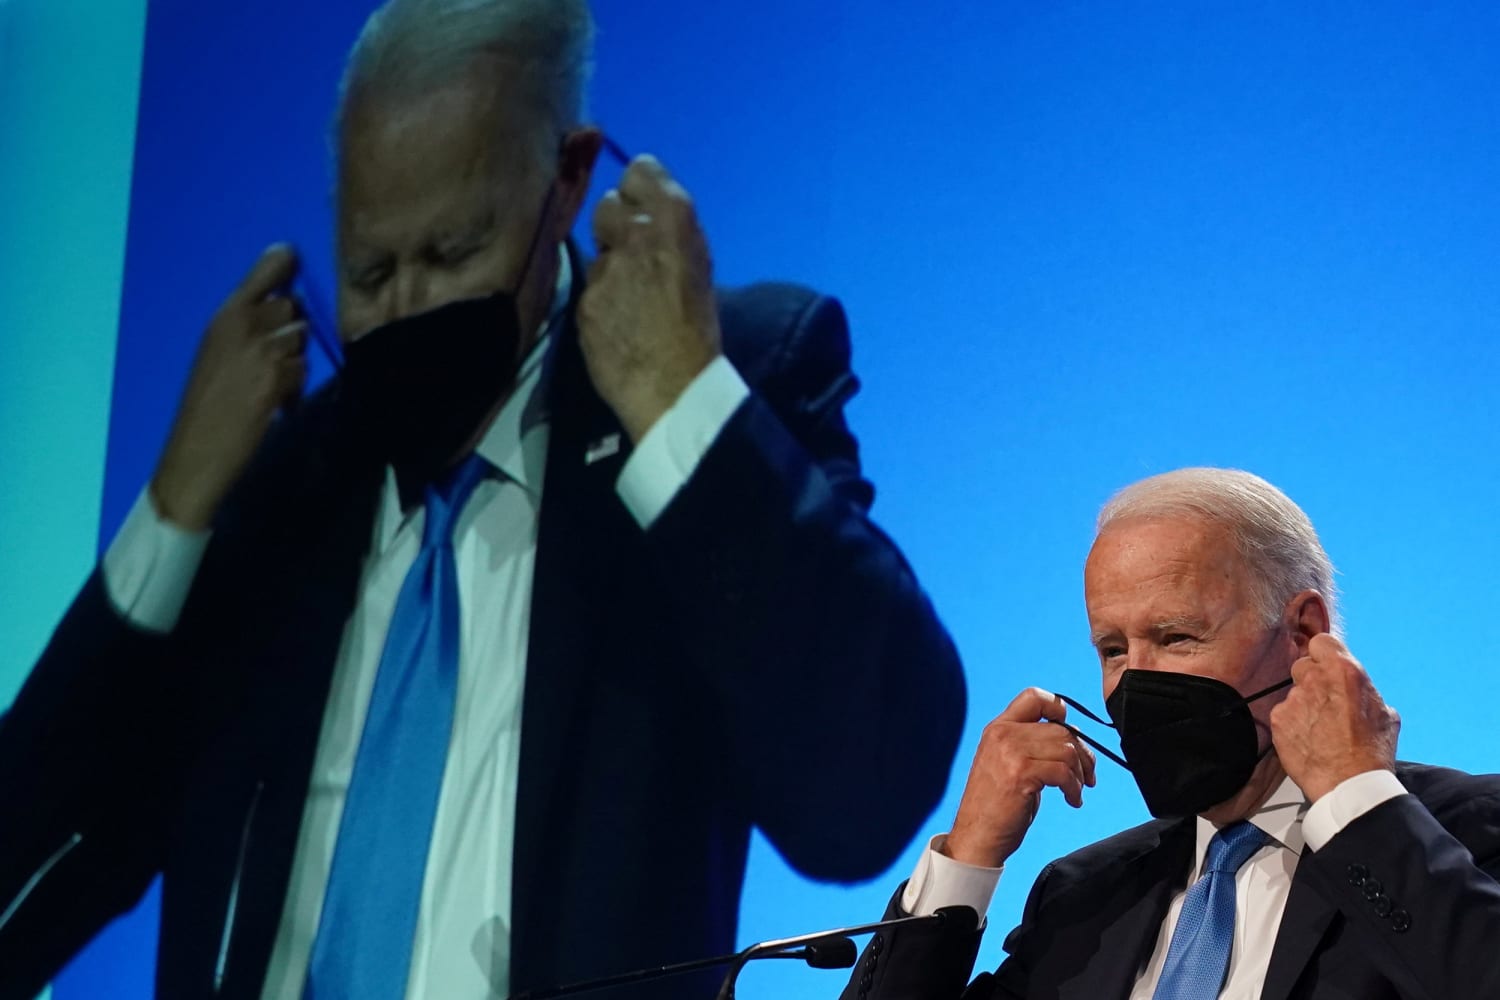 Conservatives want to make omicron Biden’s curse. But there’s blame to share.